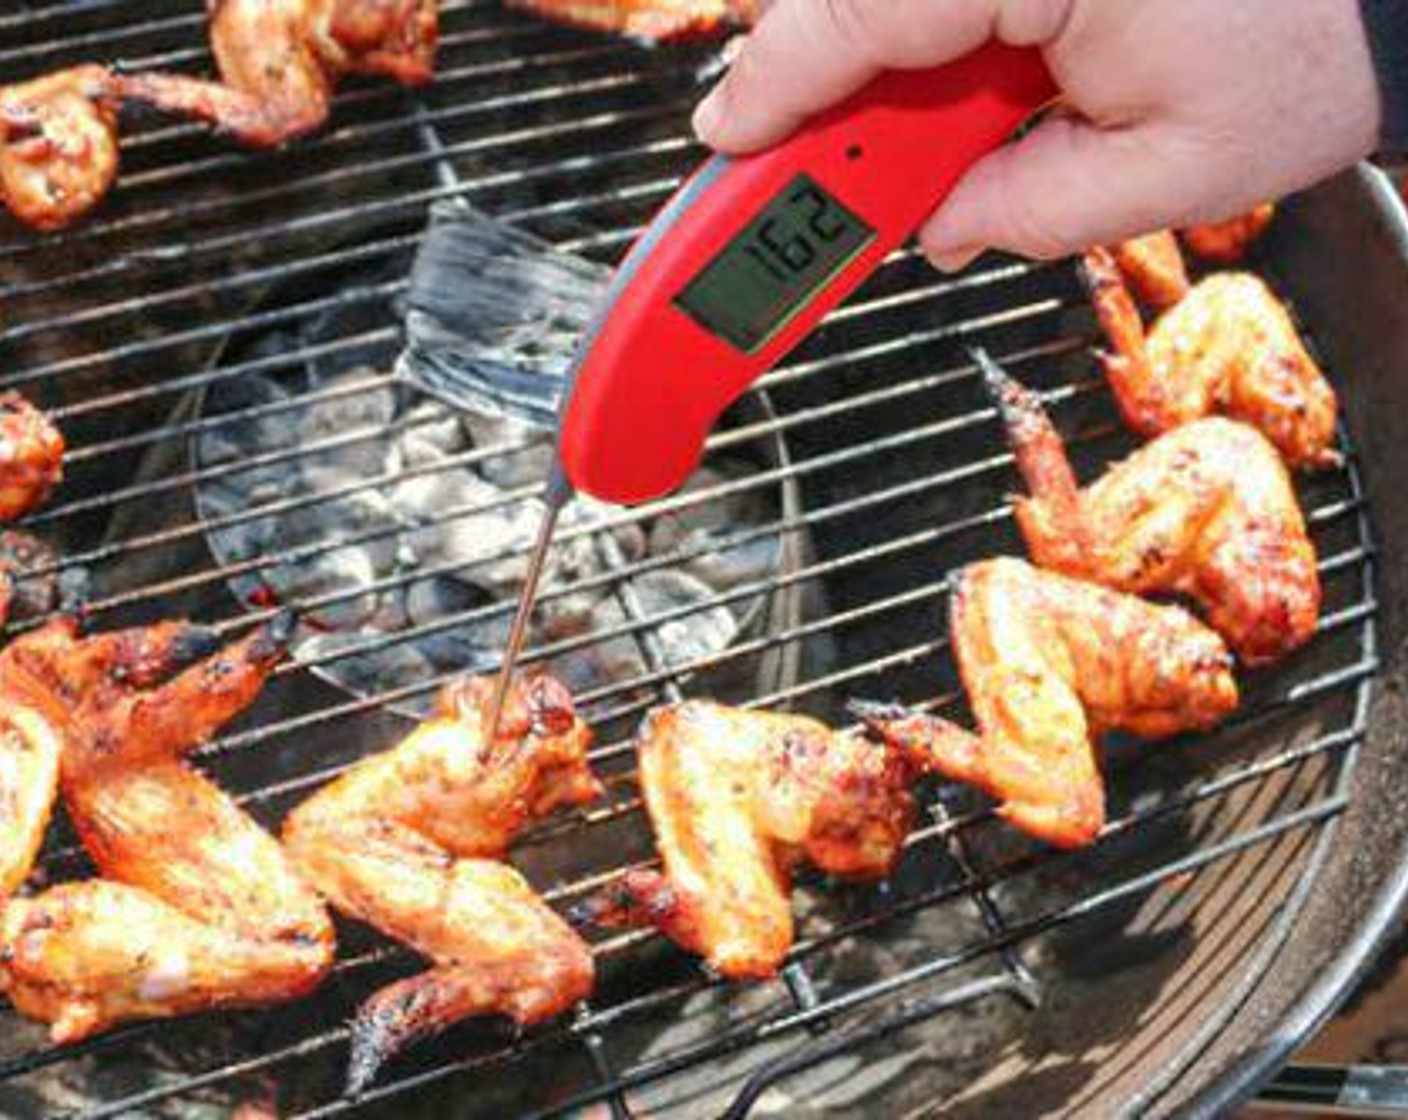 step 5 Wings are done when internal temperature reaches a minimum of 165 degrees F (73 degrees C) on an instant-read thermometer.